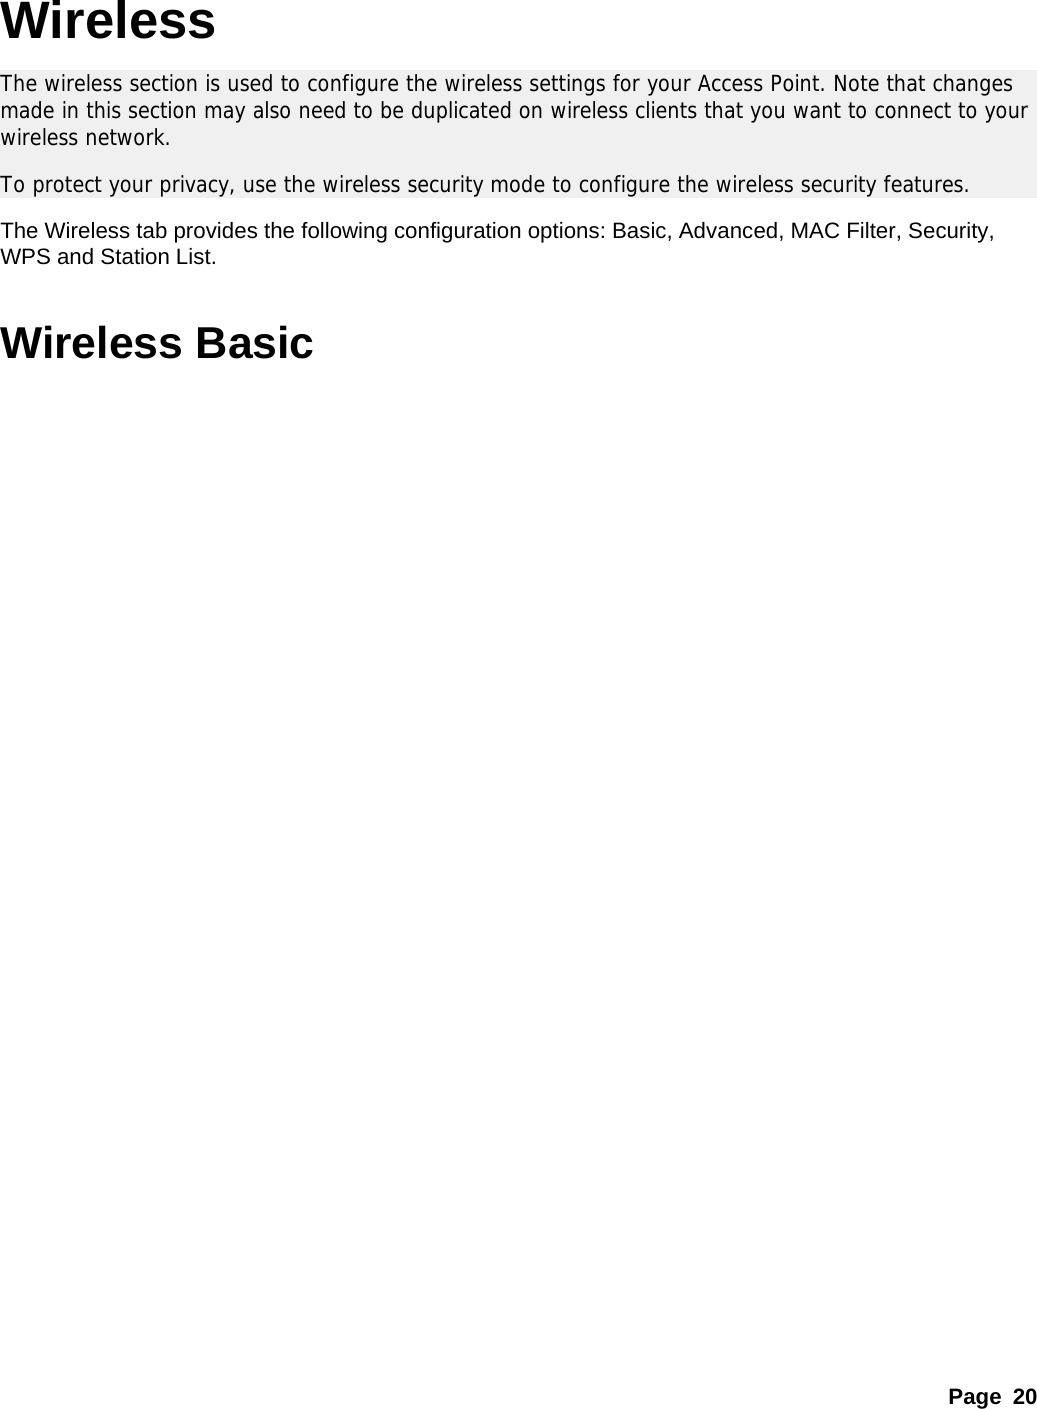 Page 20 Wireless The wireless section is used to configure the wireless settings for your Access Point. Note that changes made in this section may also need to be duplicated on wireless clients that you want to connect to your wireless network.  To protect your privacy, use the wireless security mode to configure the wireless security features.  The Wireless tab provides the following configuration options: Basic, Advanced, MAC Filter, Security, WPS and Station List.    Wireless Basic 